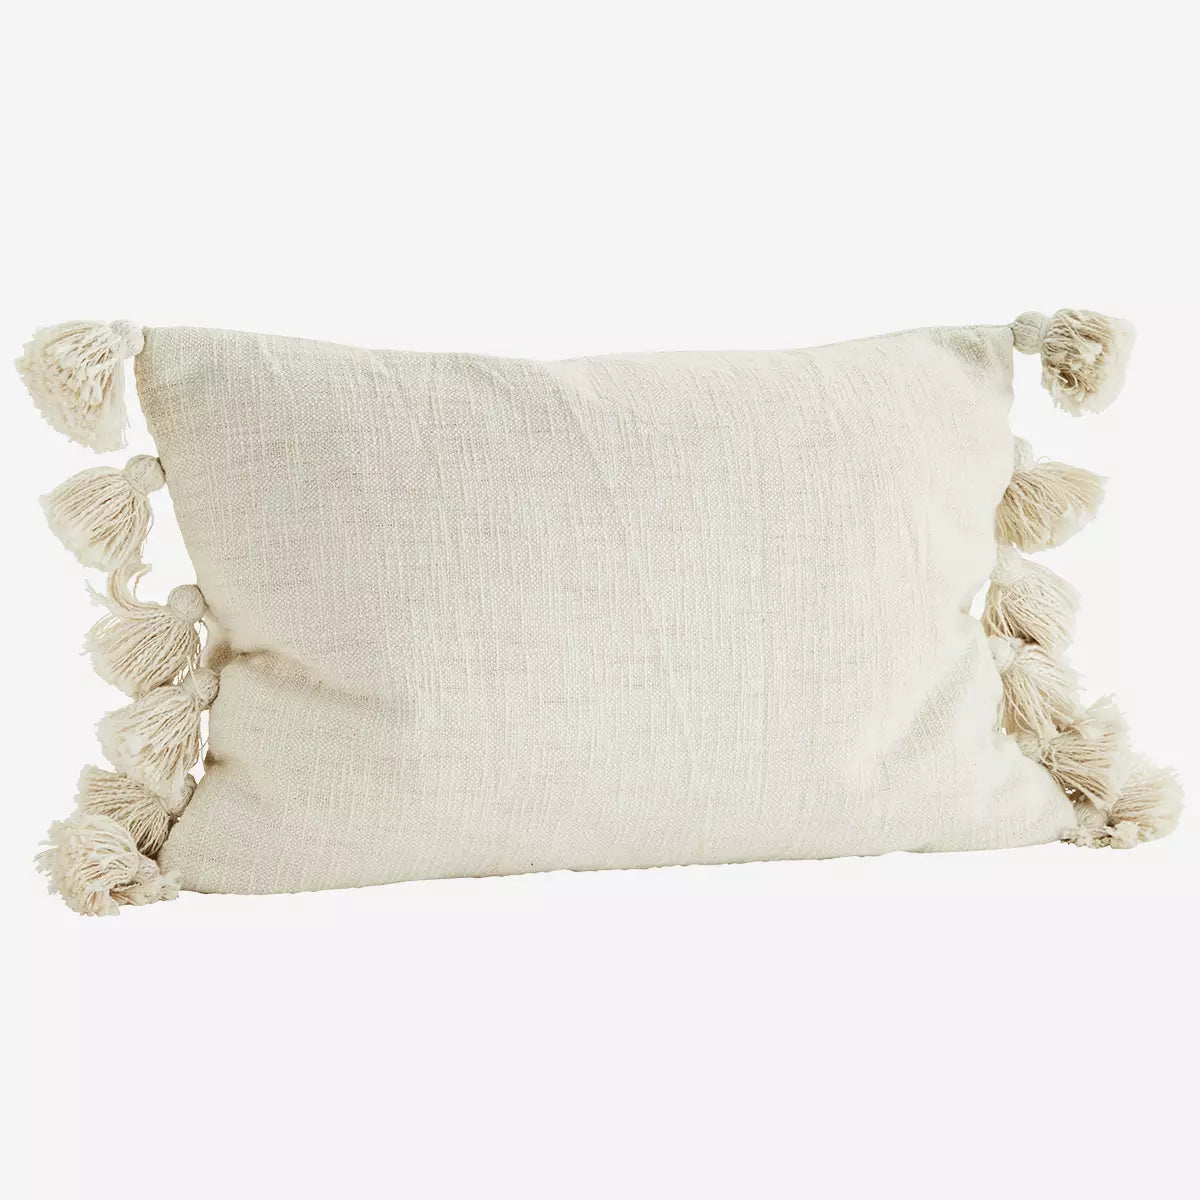 Cushion cover with tassels